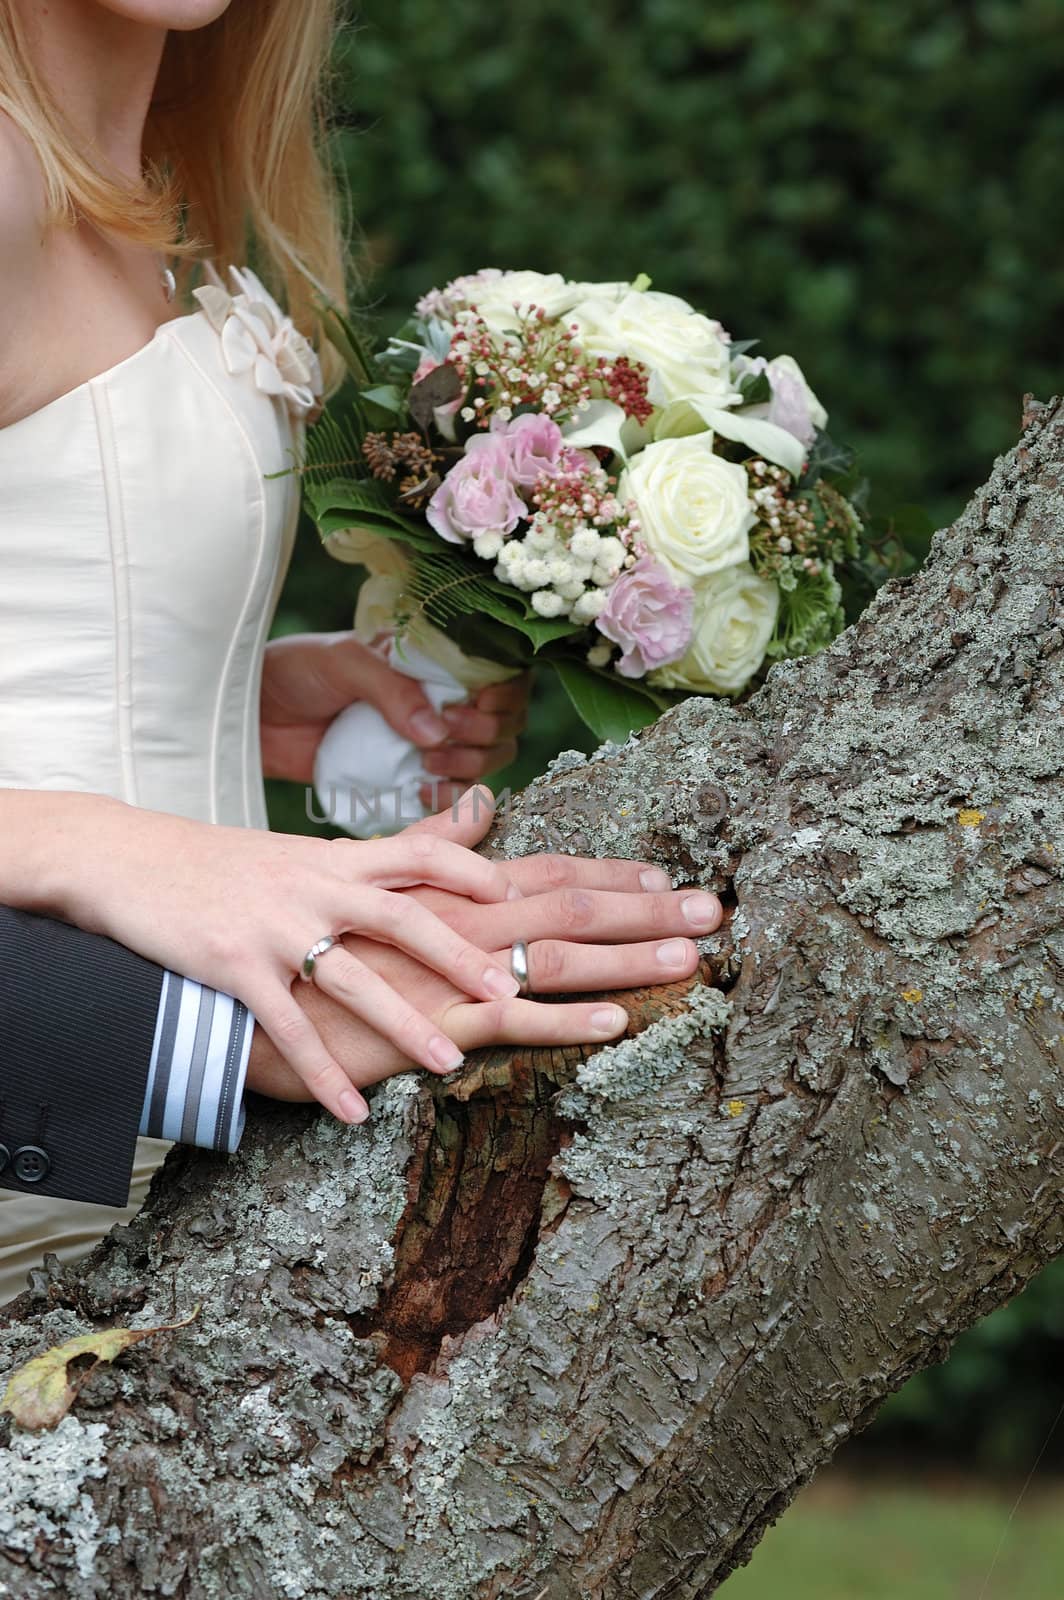 Hands, rings and bouquet of a wedding couple